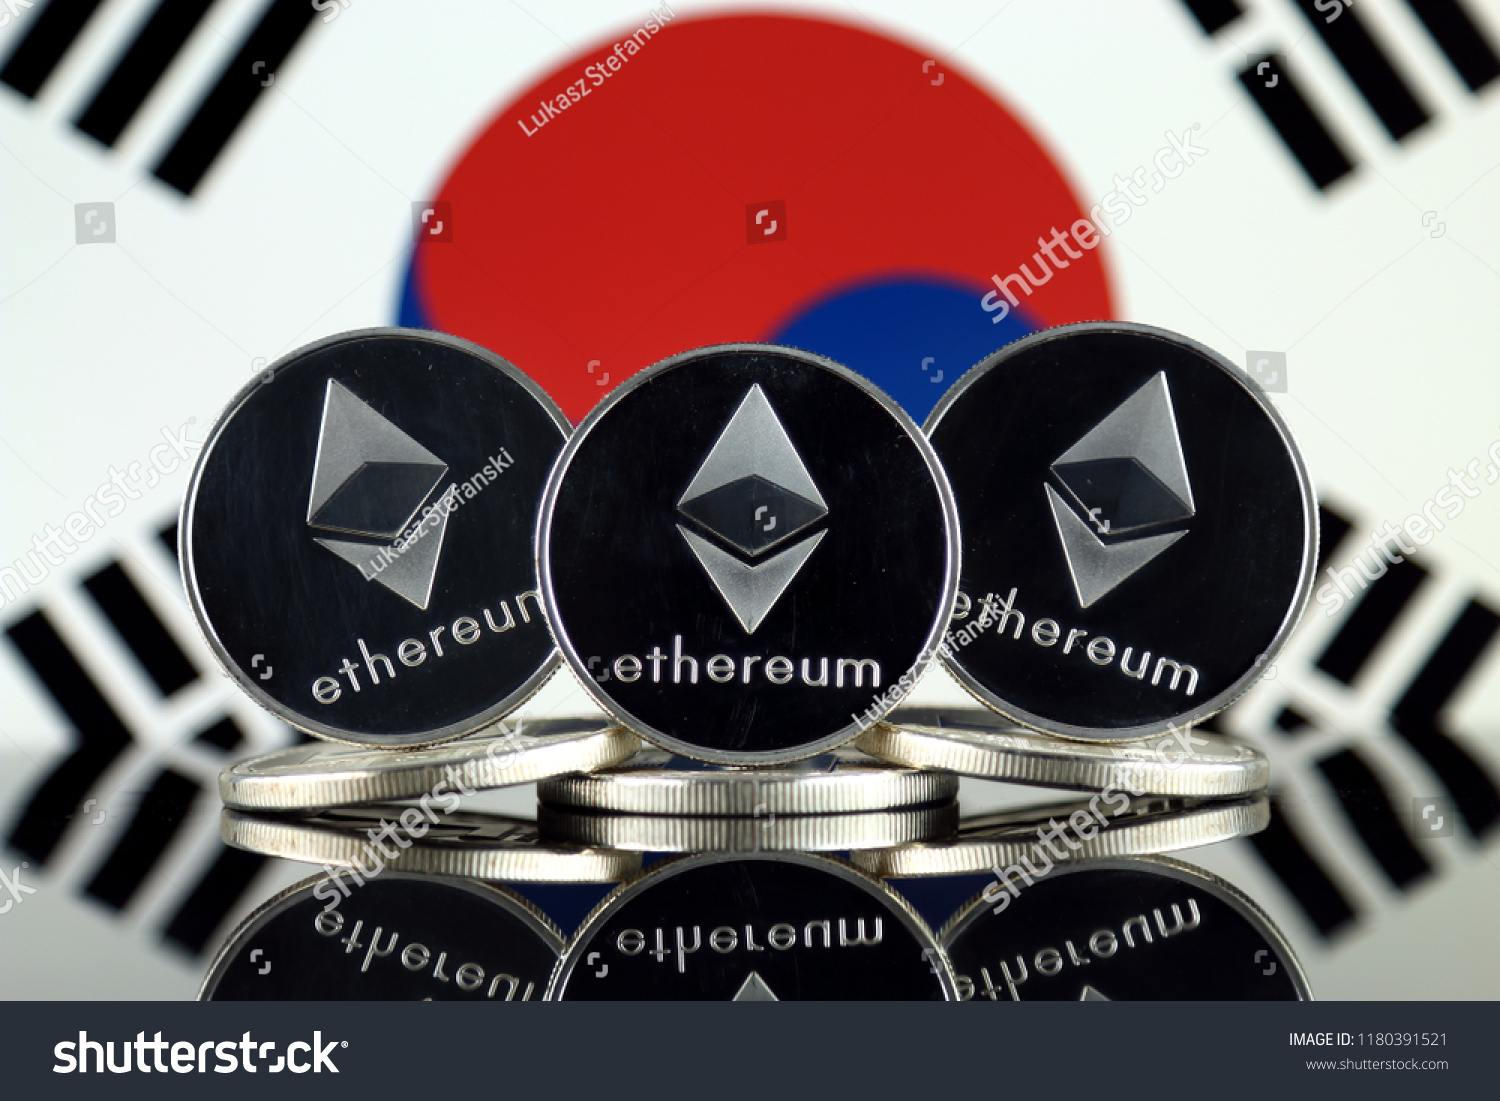 South korea ethereum global cryptocurrency commission